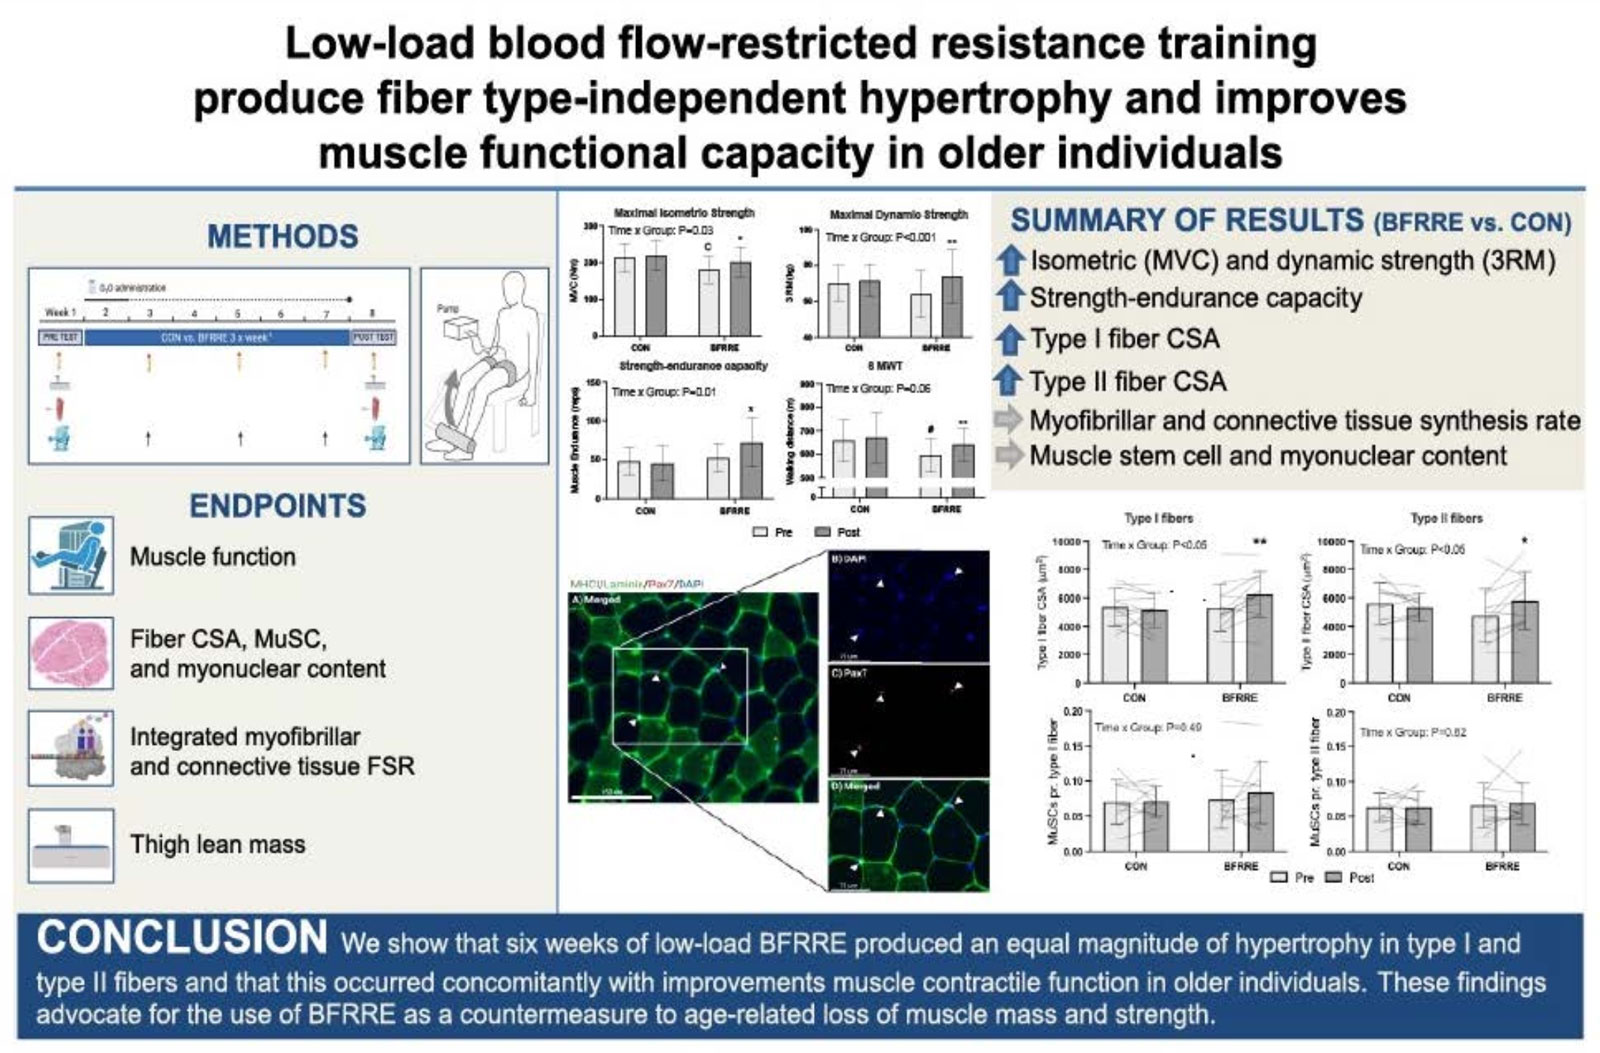 BFRRE Improves Muscle Functional Capacity in Older Adults